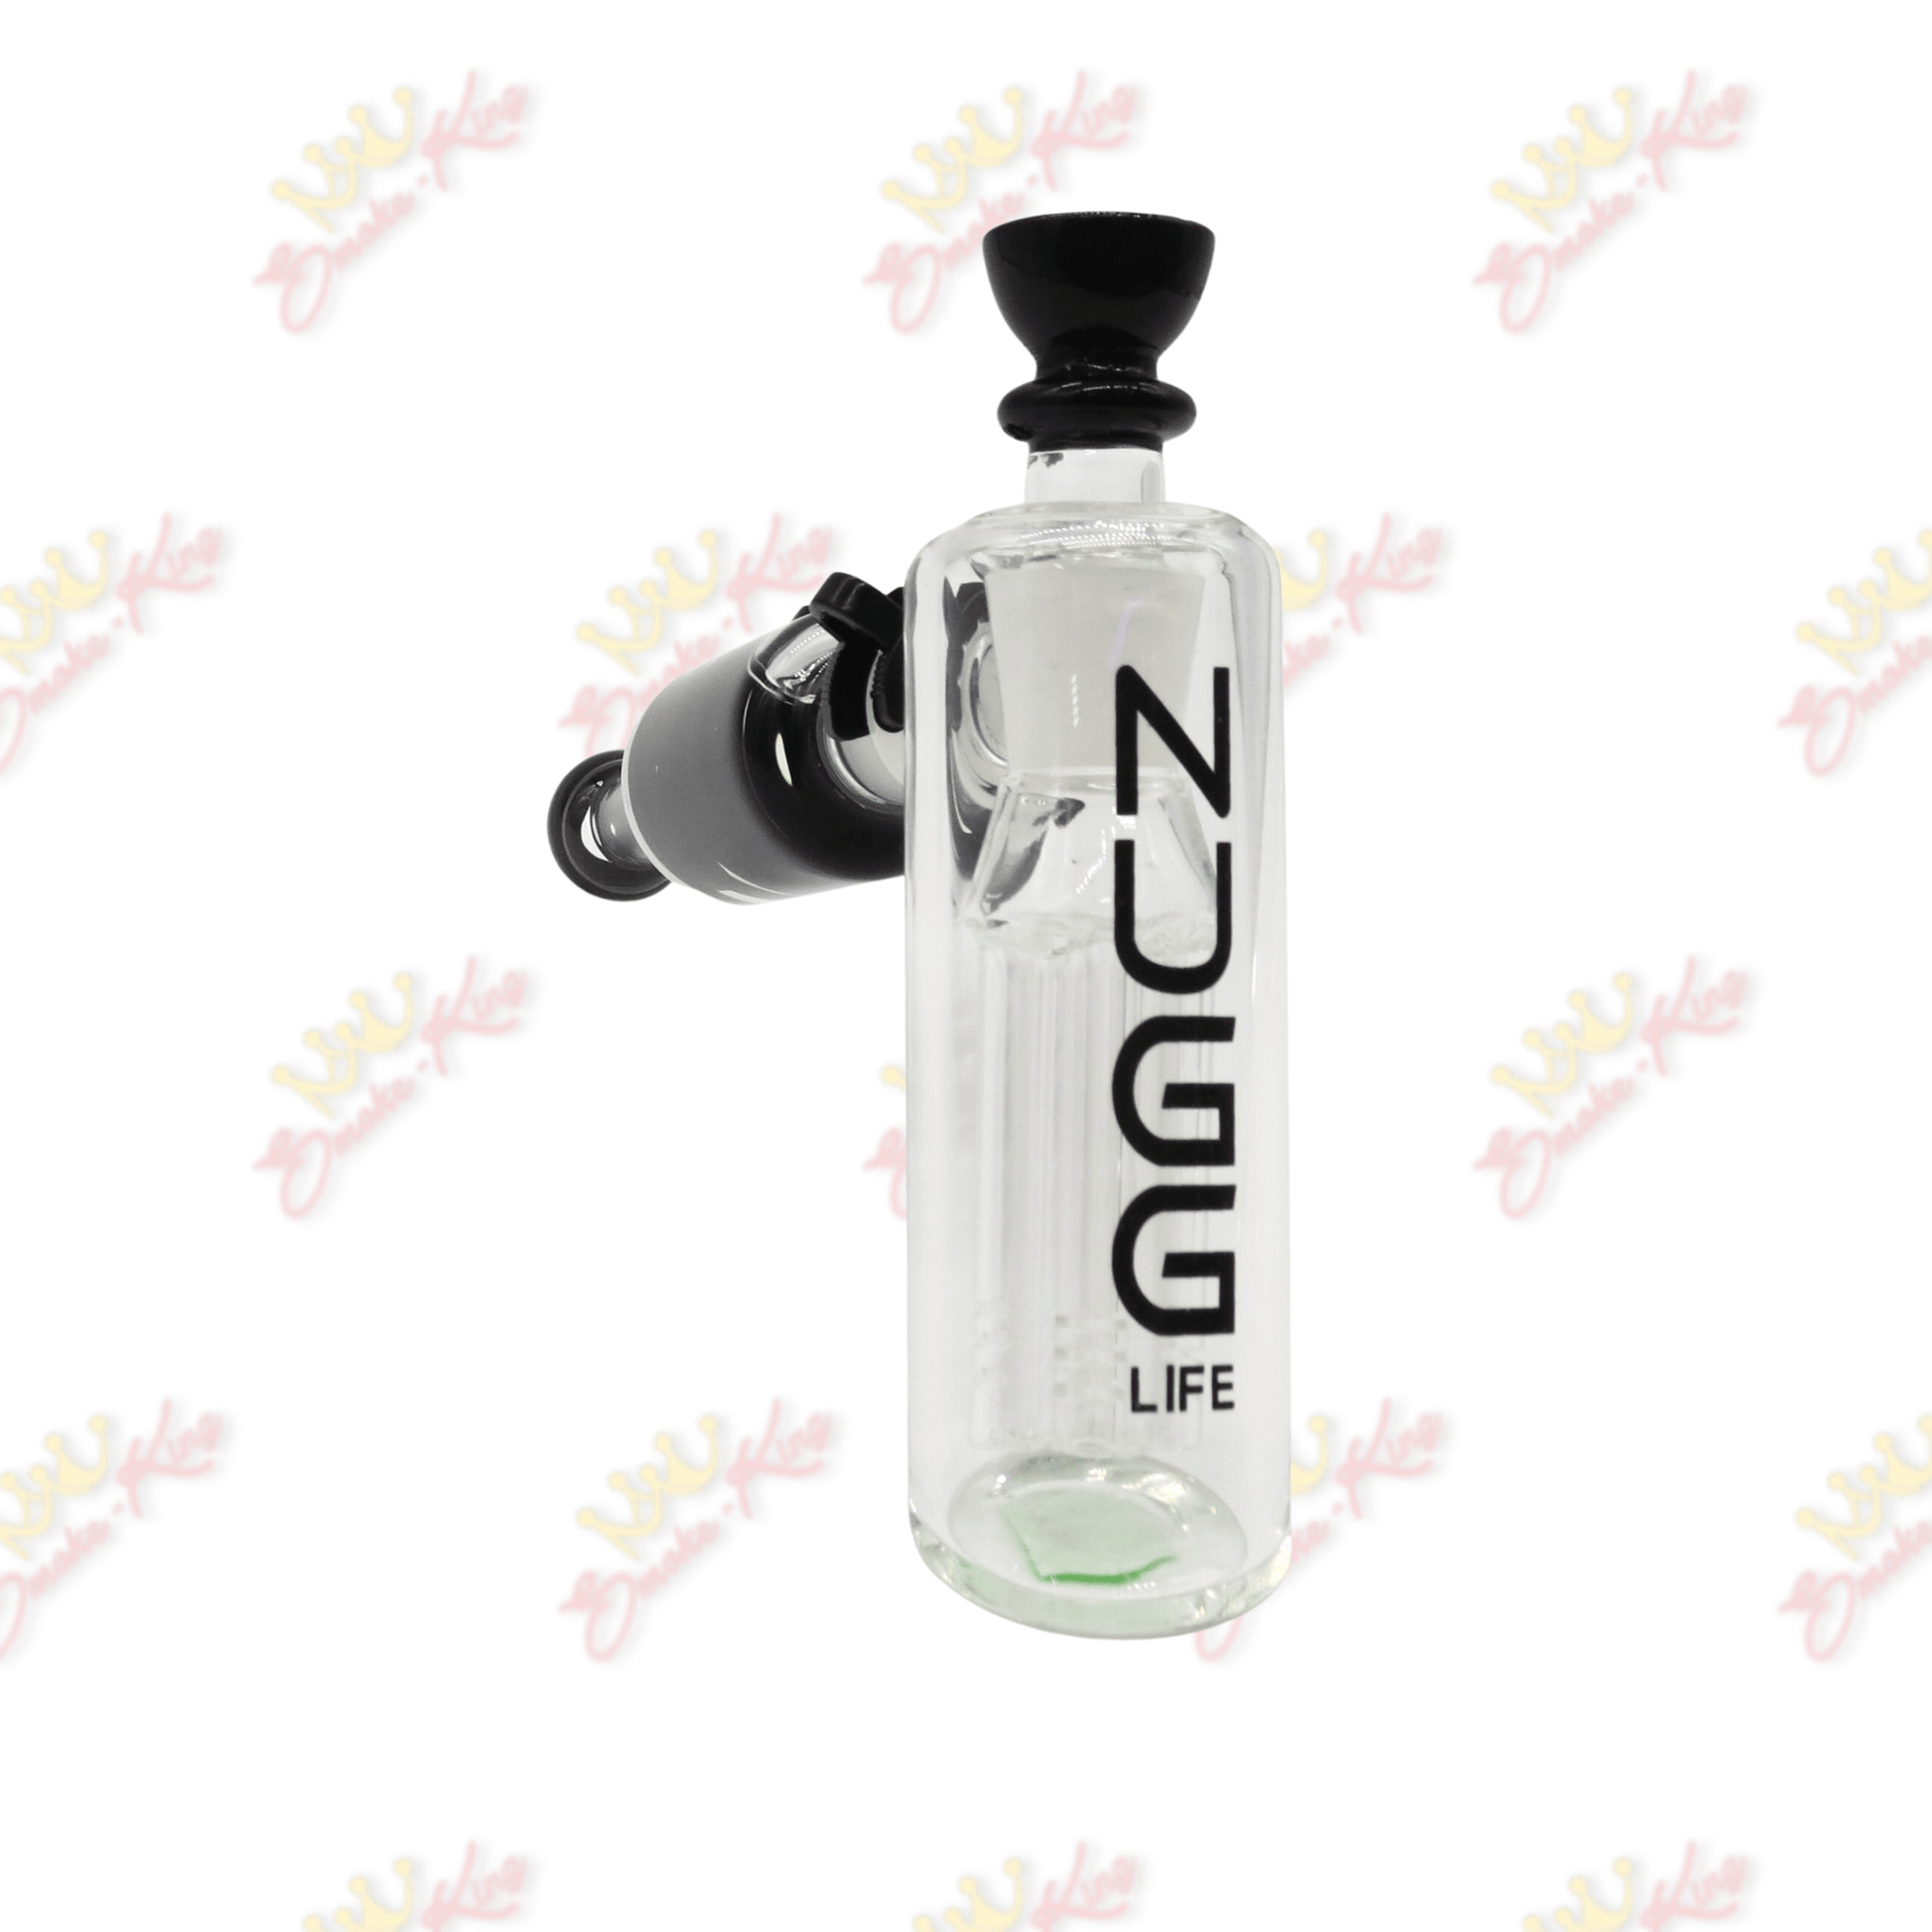 Smokeking featured-pipes NUGG LIFE Water Pipe